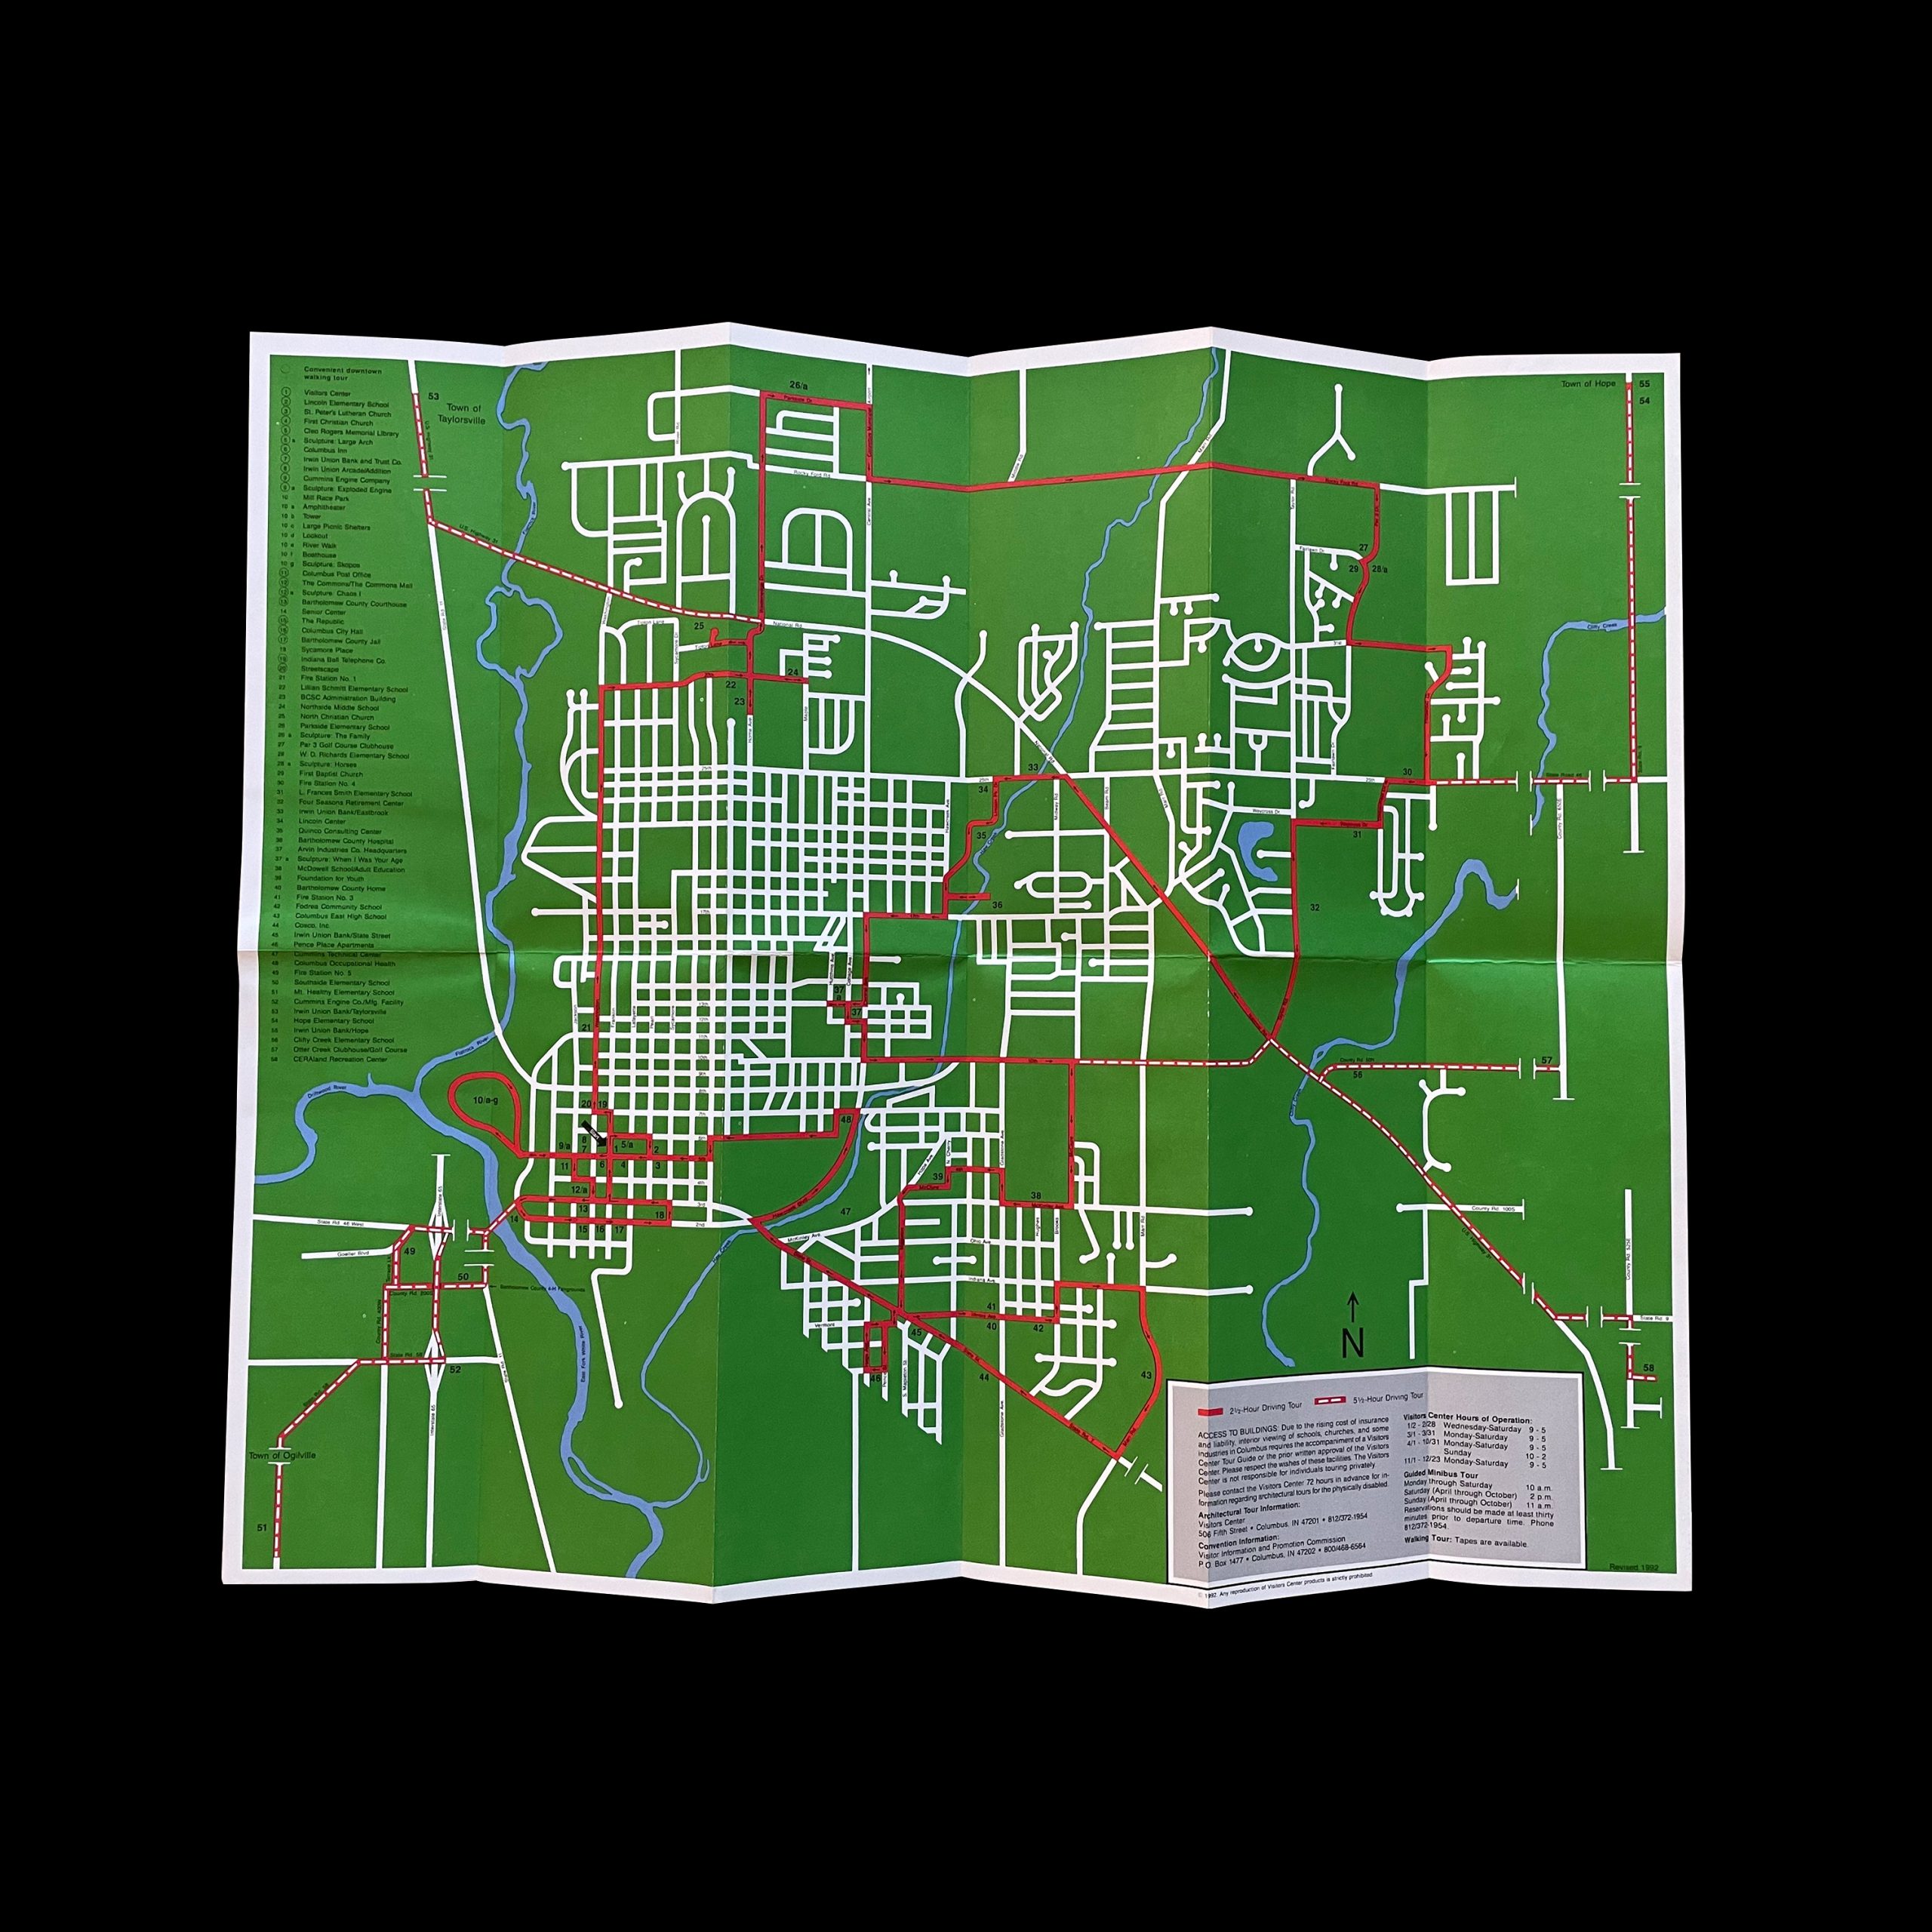 Architectural Tour Map, Columbus Indiana, 1991. Designed by Paul Rand